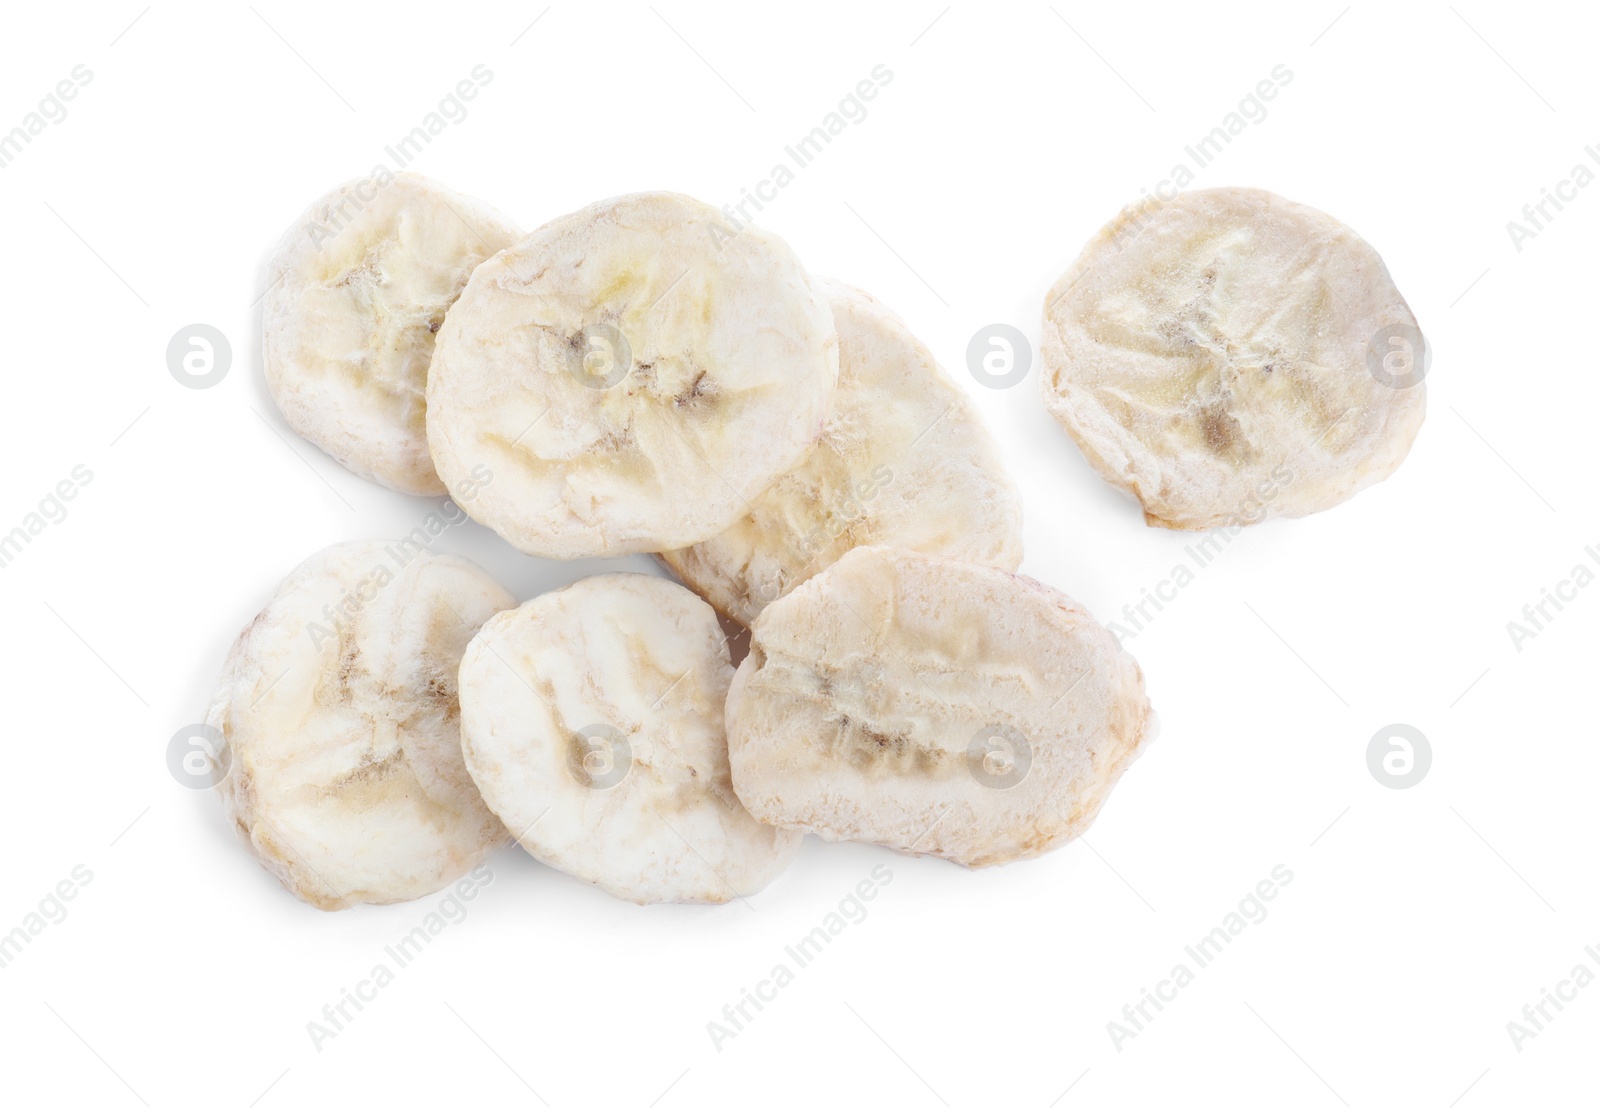 Photo of Pile of freeze dried bananas on white background, top view